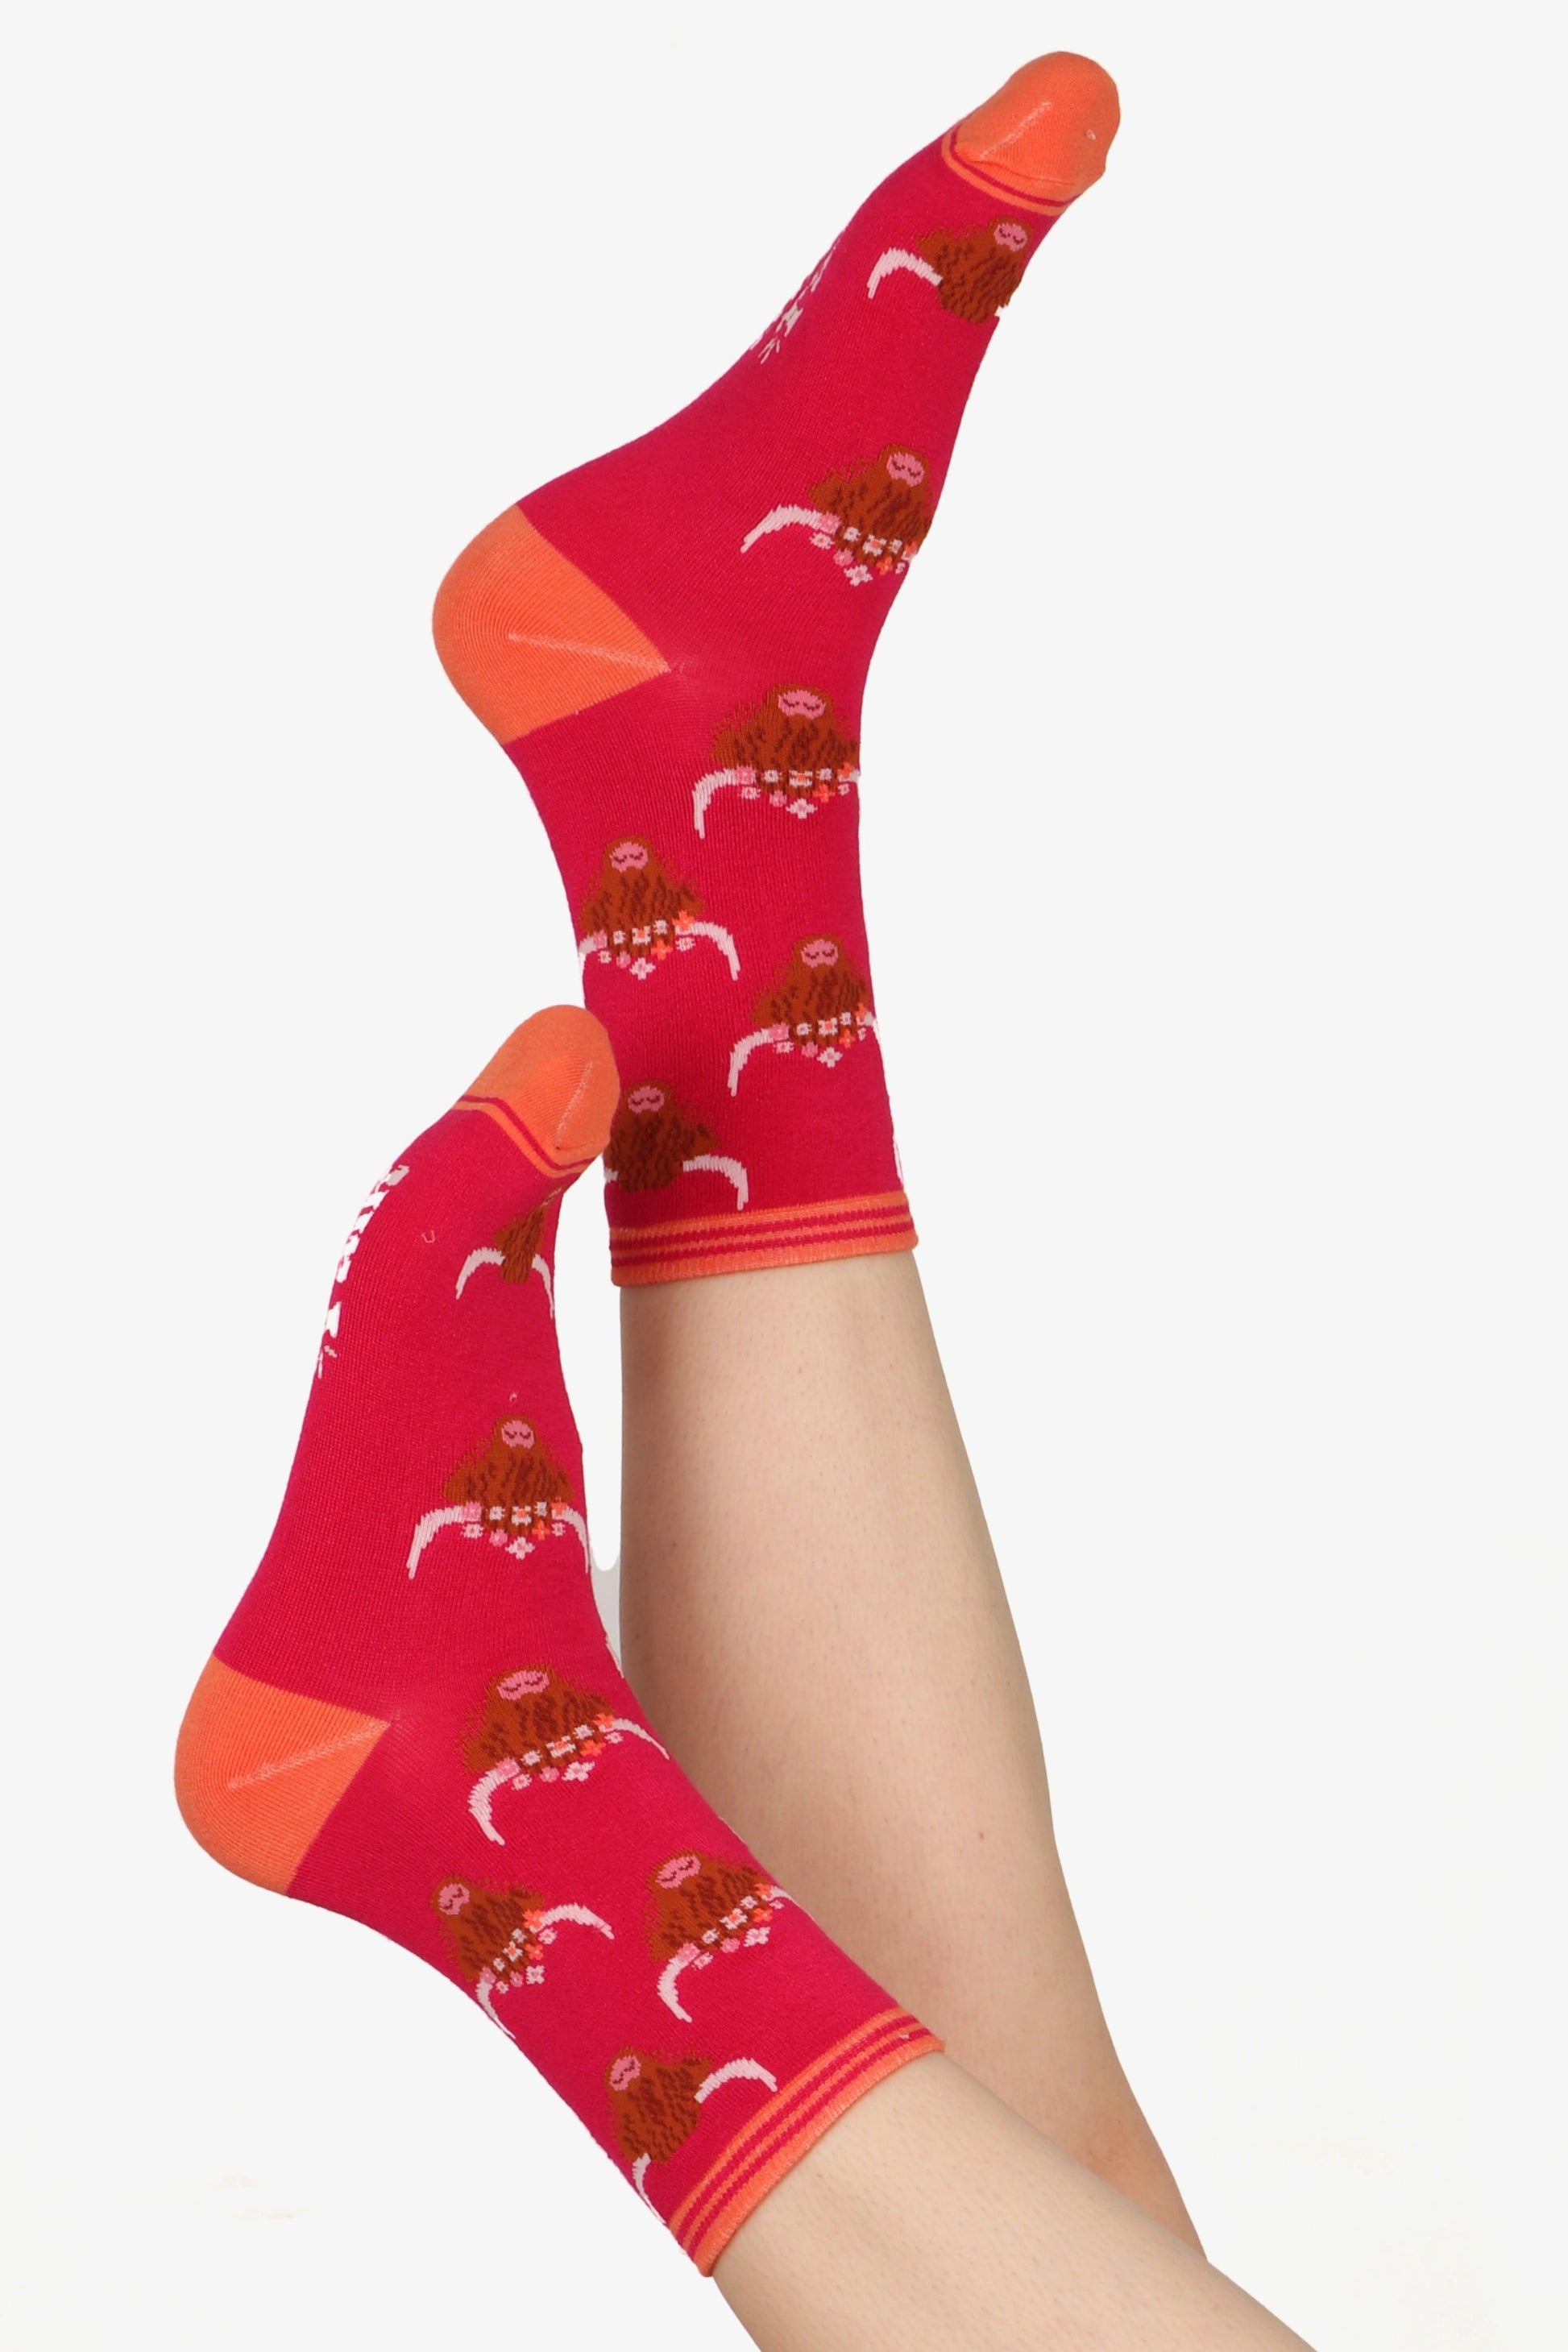 Ladies feet posed in the air wearing highland cow print bamboo socks. Constrating ornage tone toe and heel can be seen